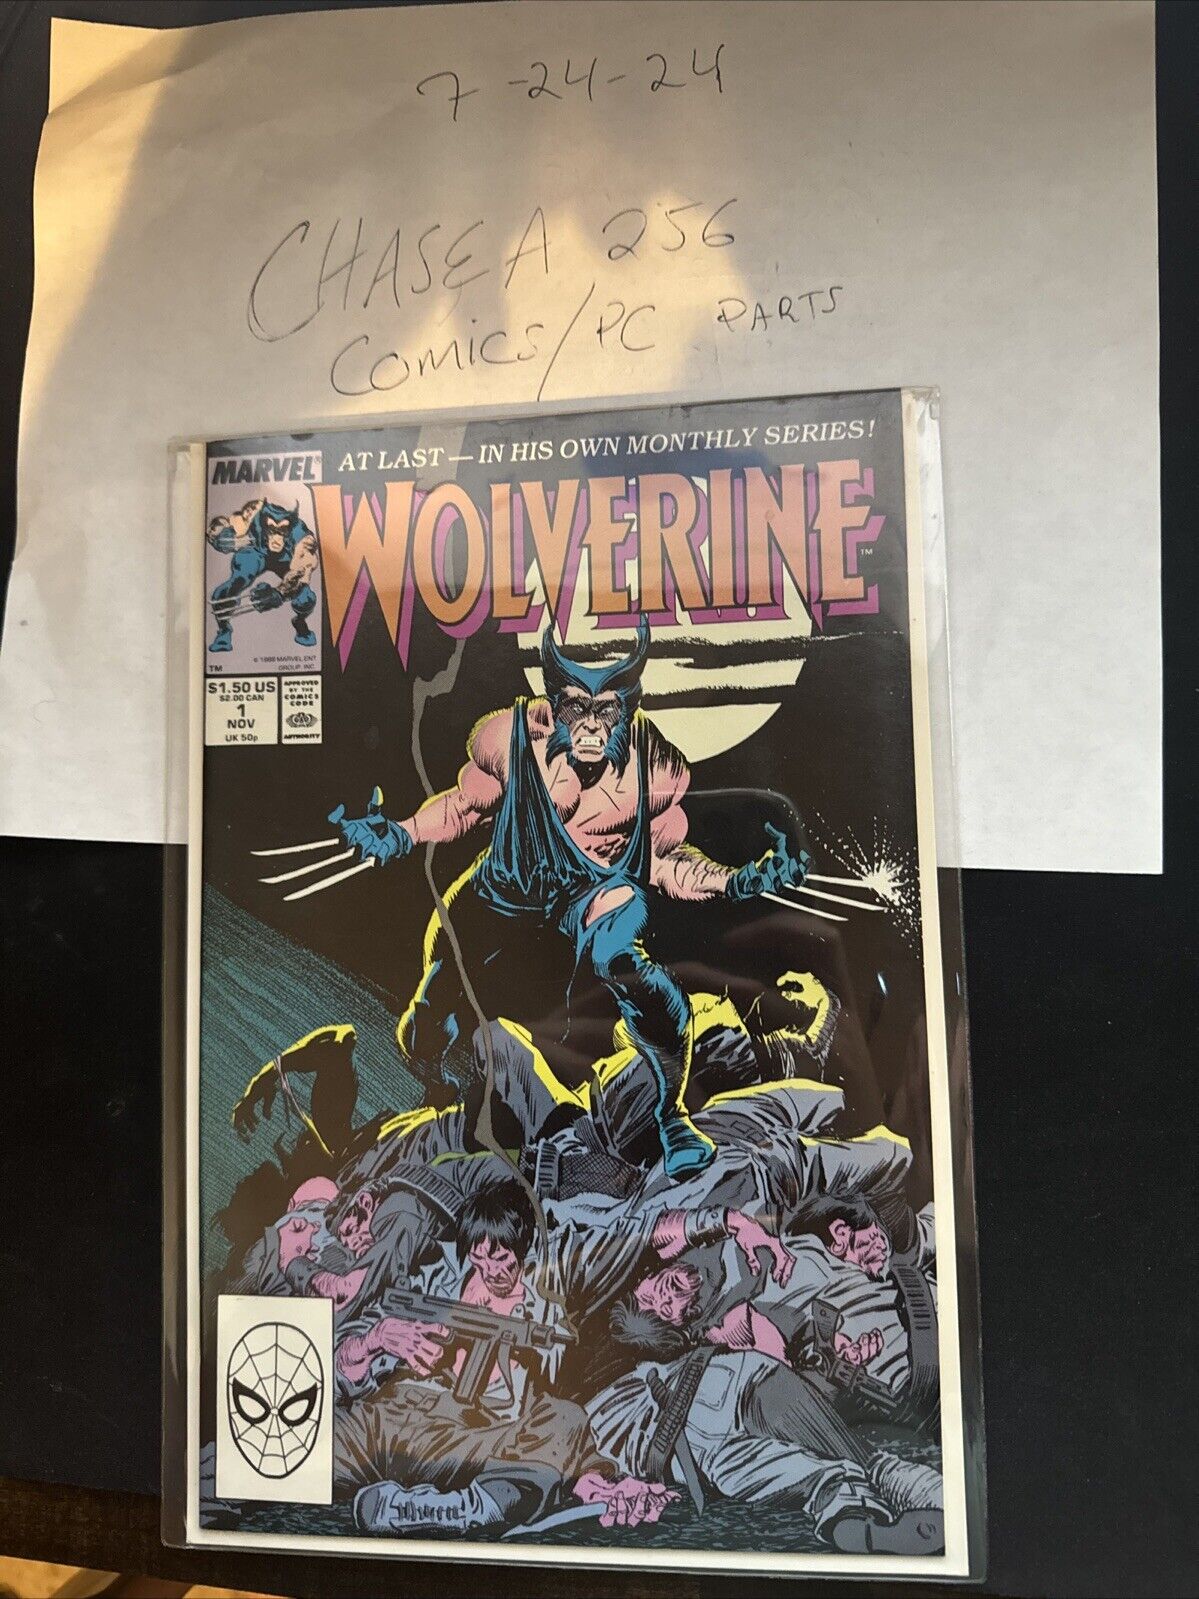 Wolverine #1 (1988) 1st app. of Wolverine as Patch - Near Mint Condition